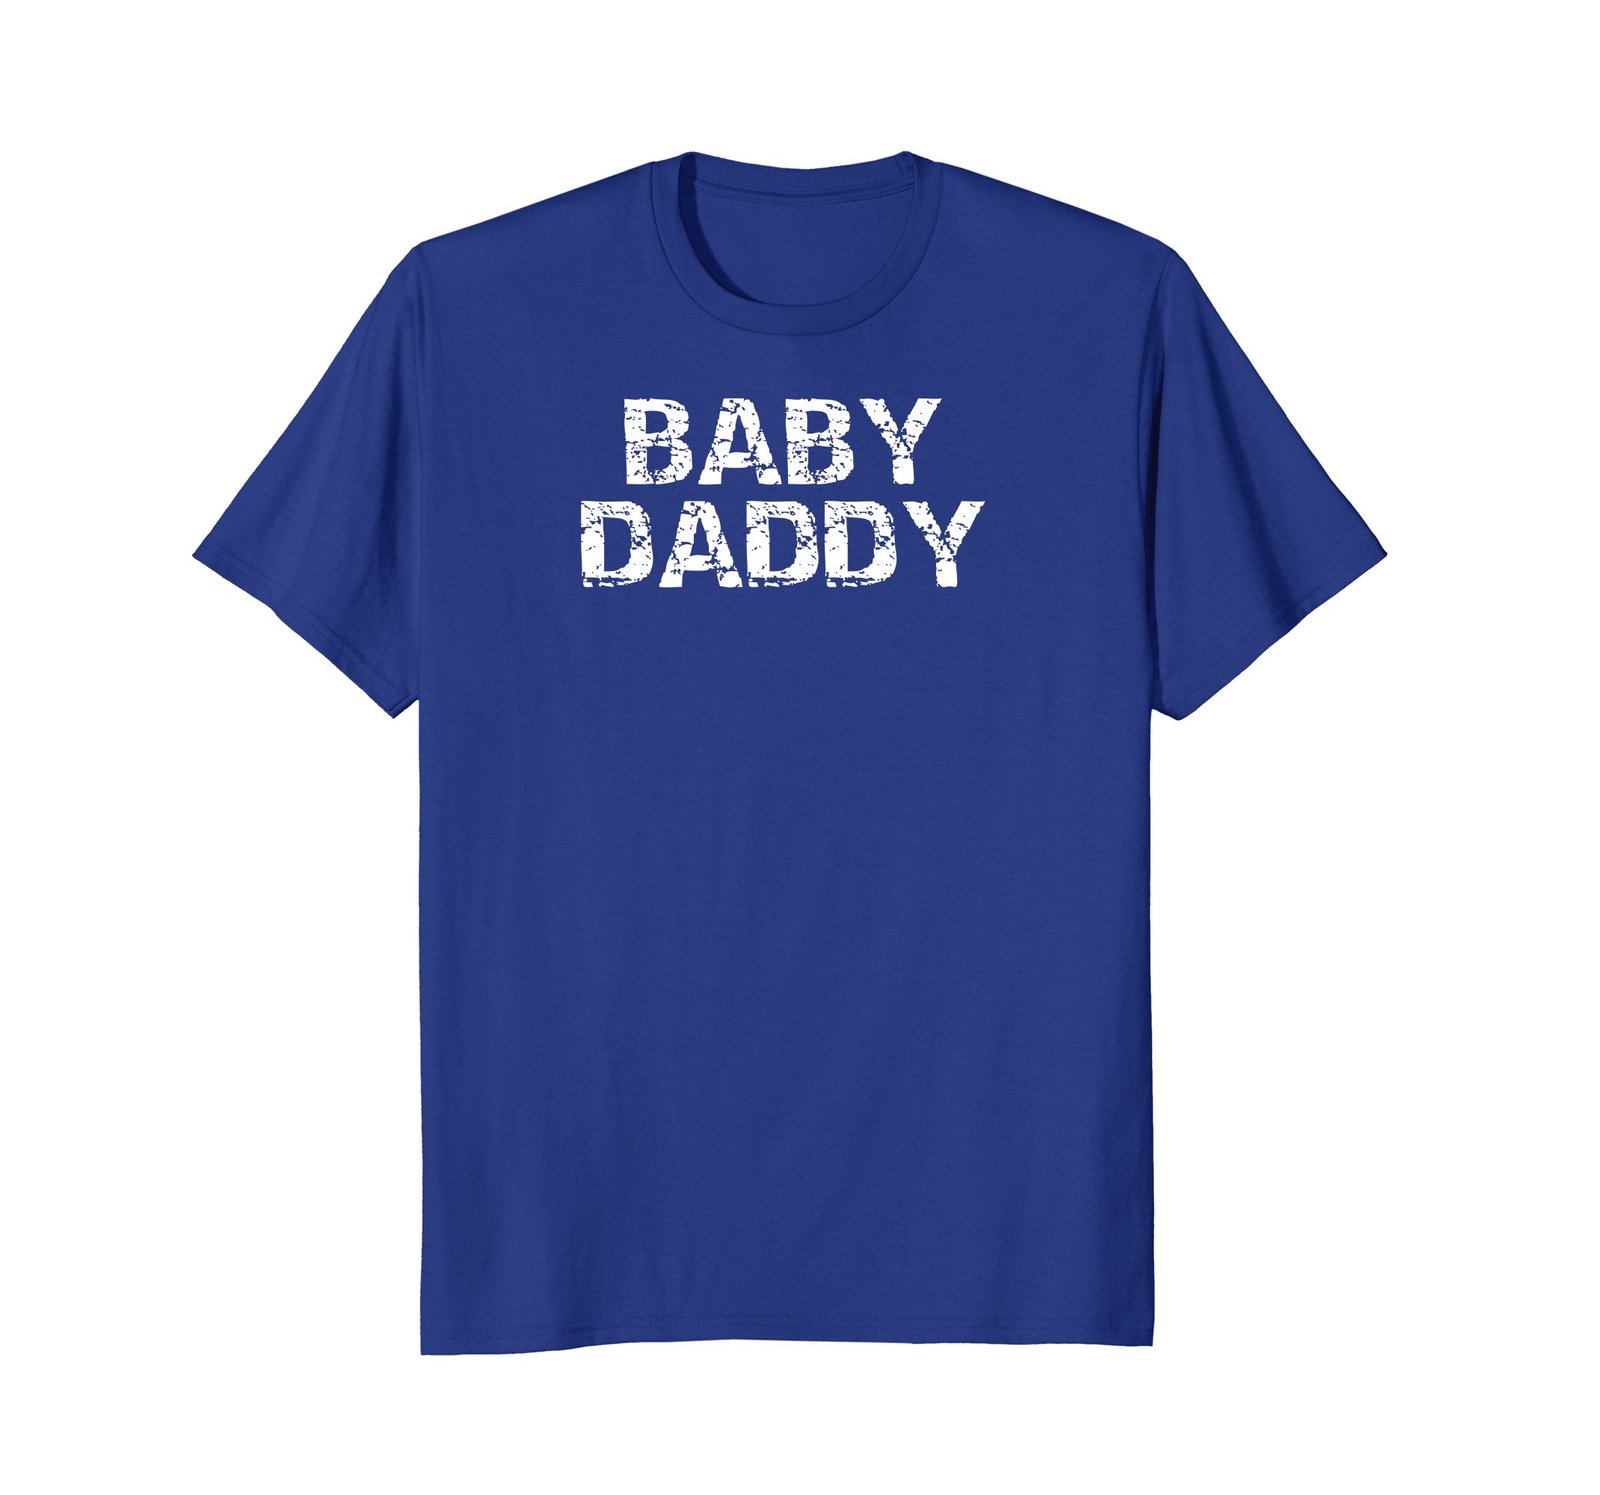 Funny Shirts - Funny Baby Daddy Retro Slang Distressed Throwback T ...